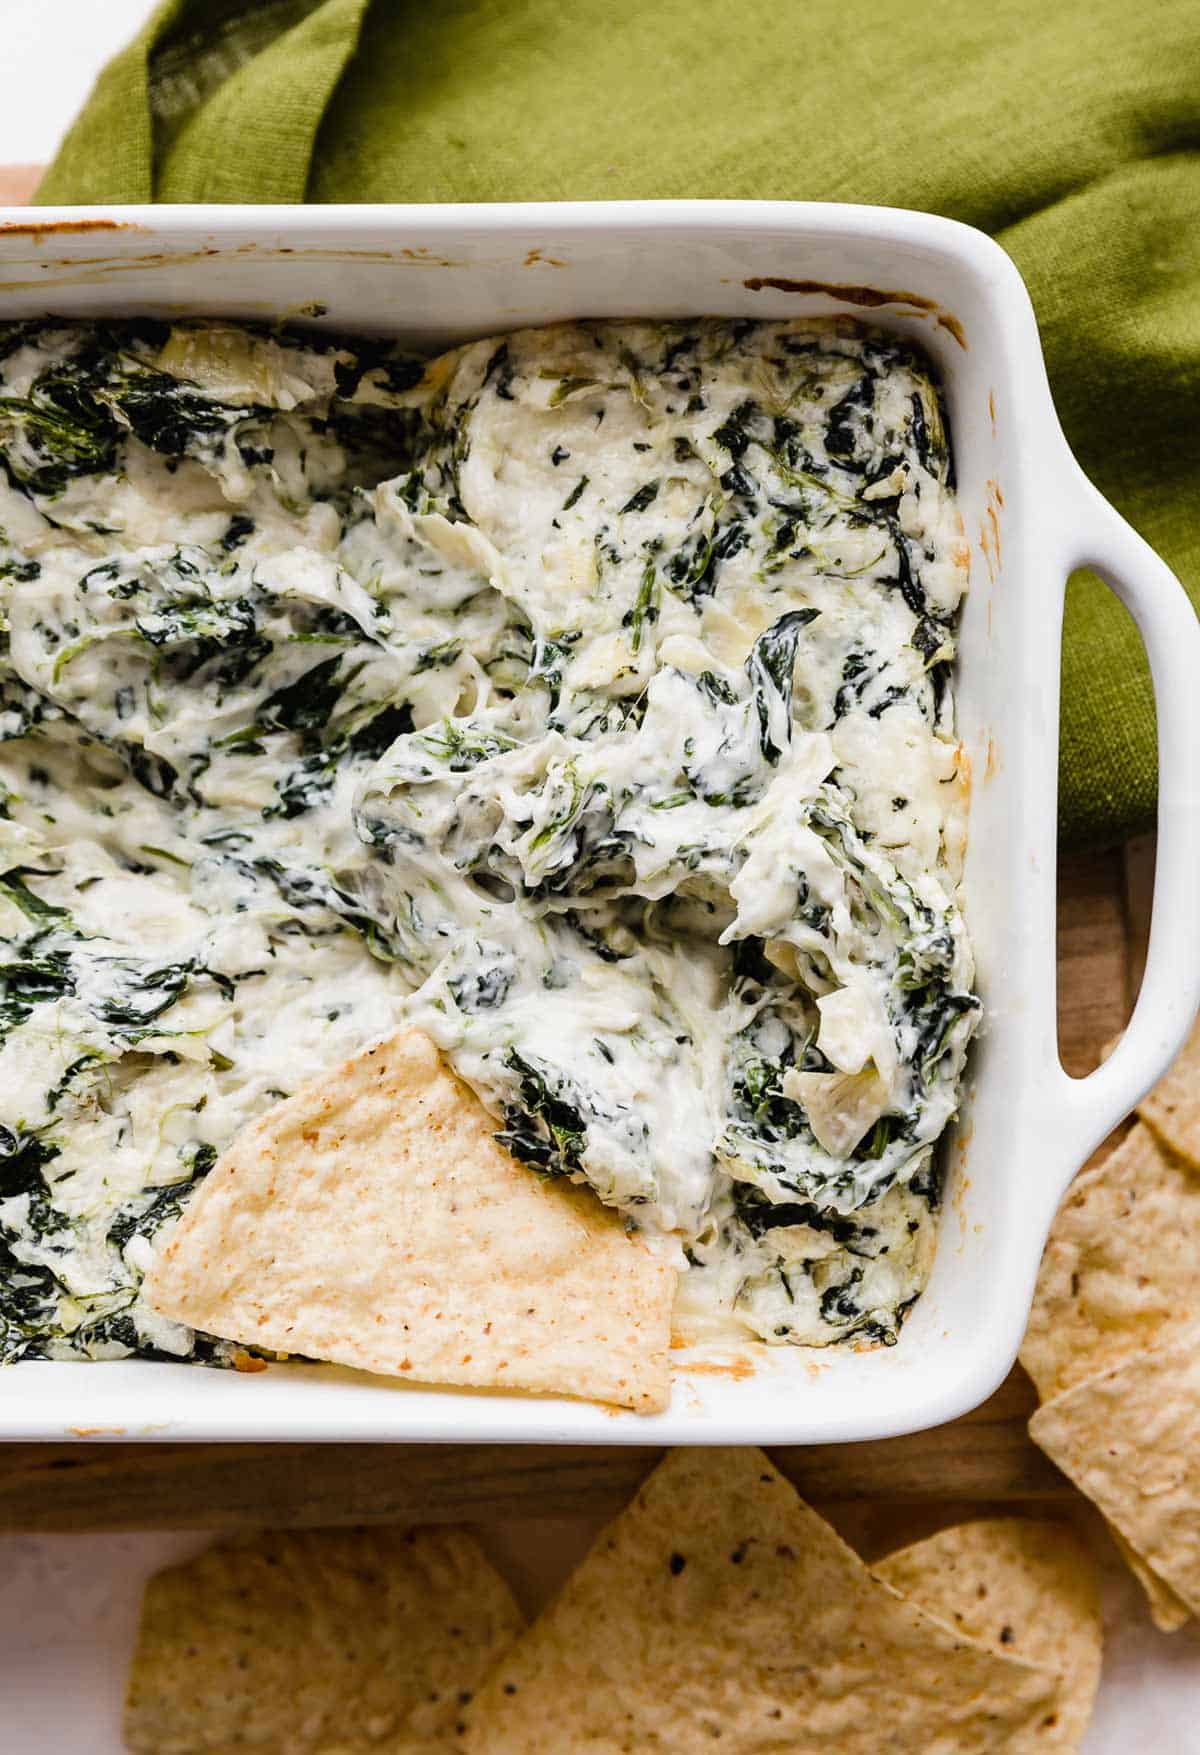 A tortilla chip in the pan filled with Hot Spinach Artichoke Dip.